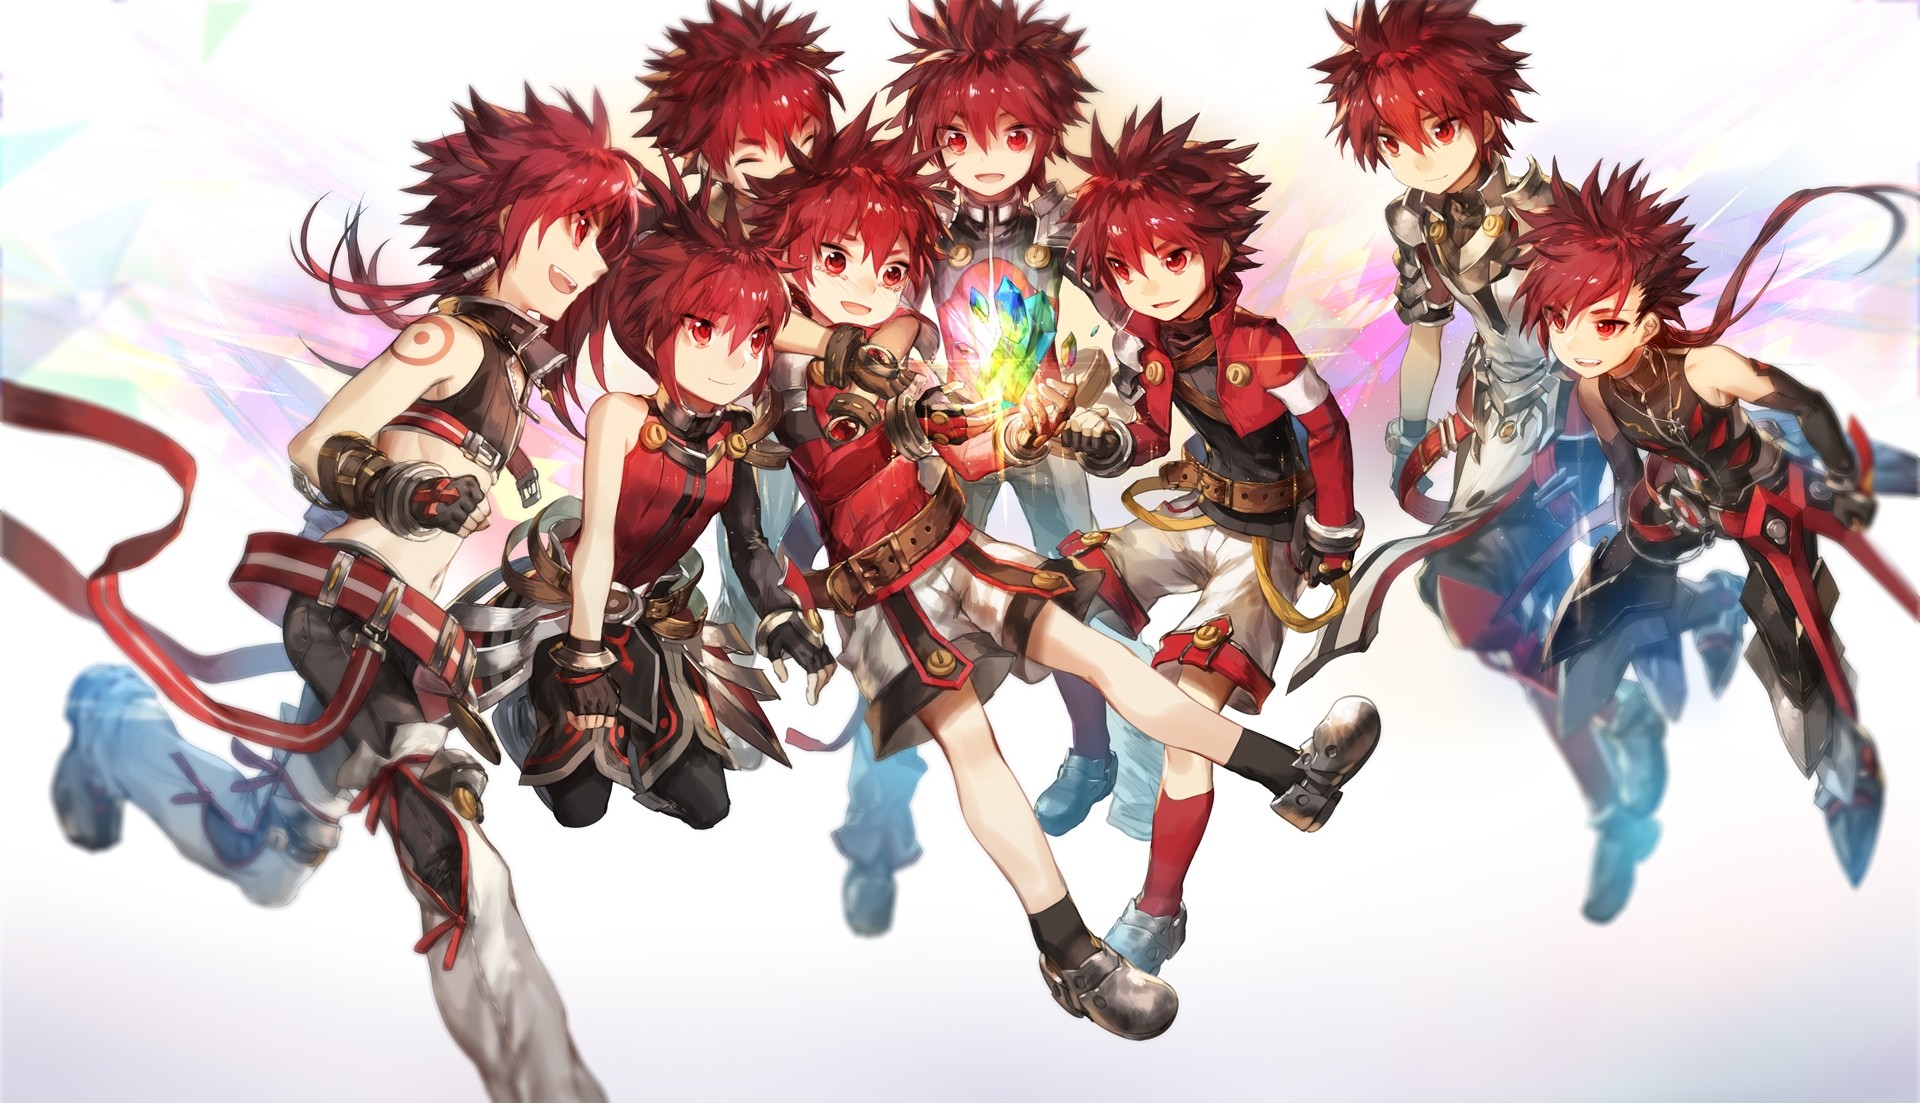 1920x1103  - elsword, male character, redhead, anime style games # original  resolution. elsword wallpapers ...